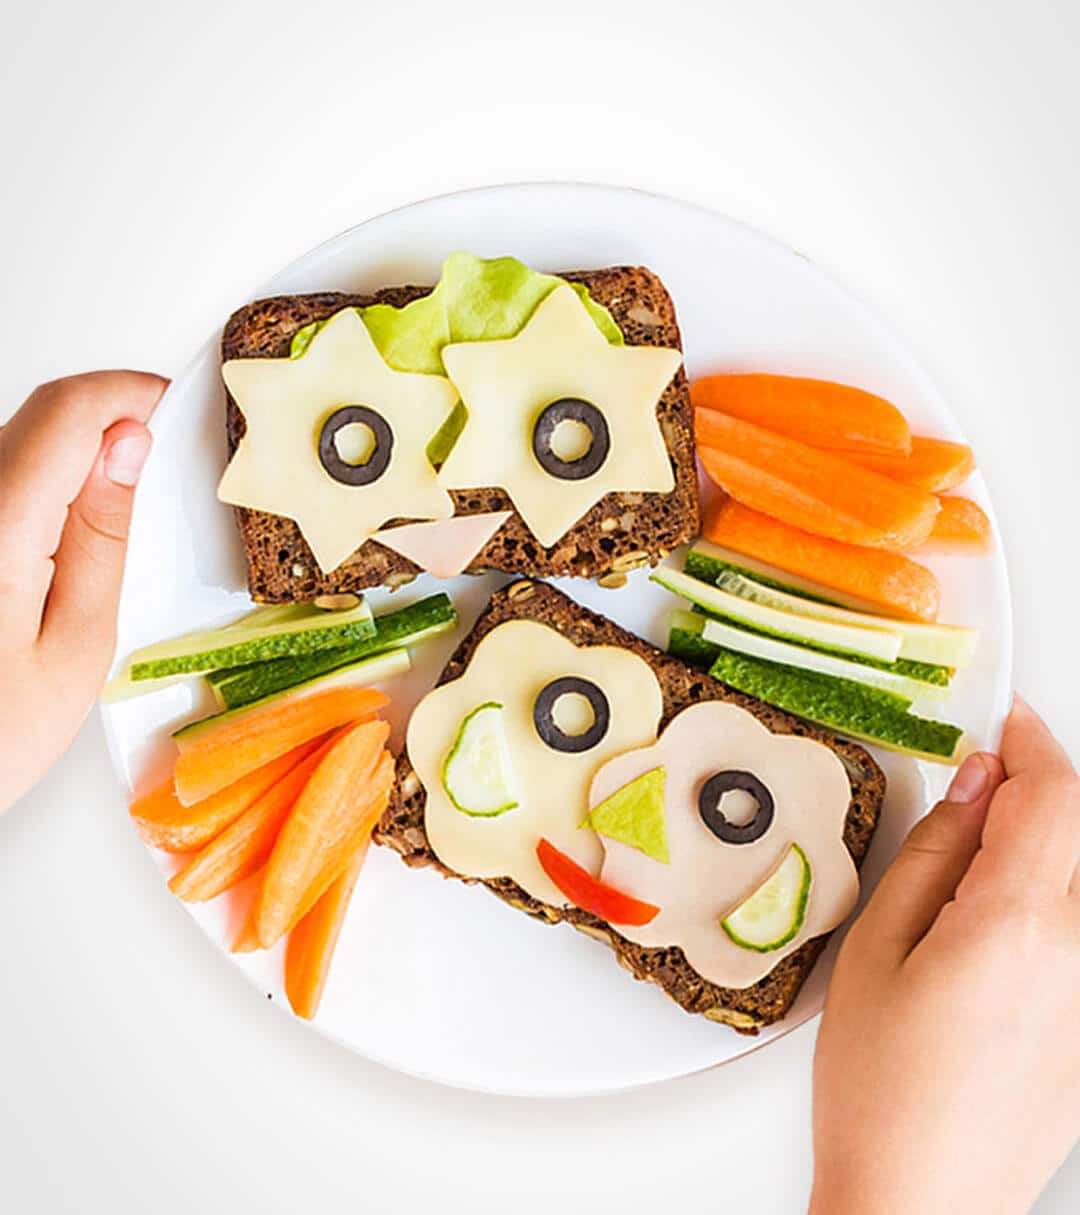 Sandwiches decorated with fun shaped vegetables, ham and cheese